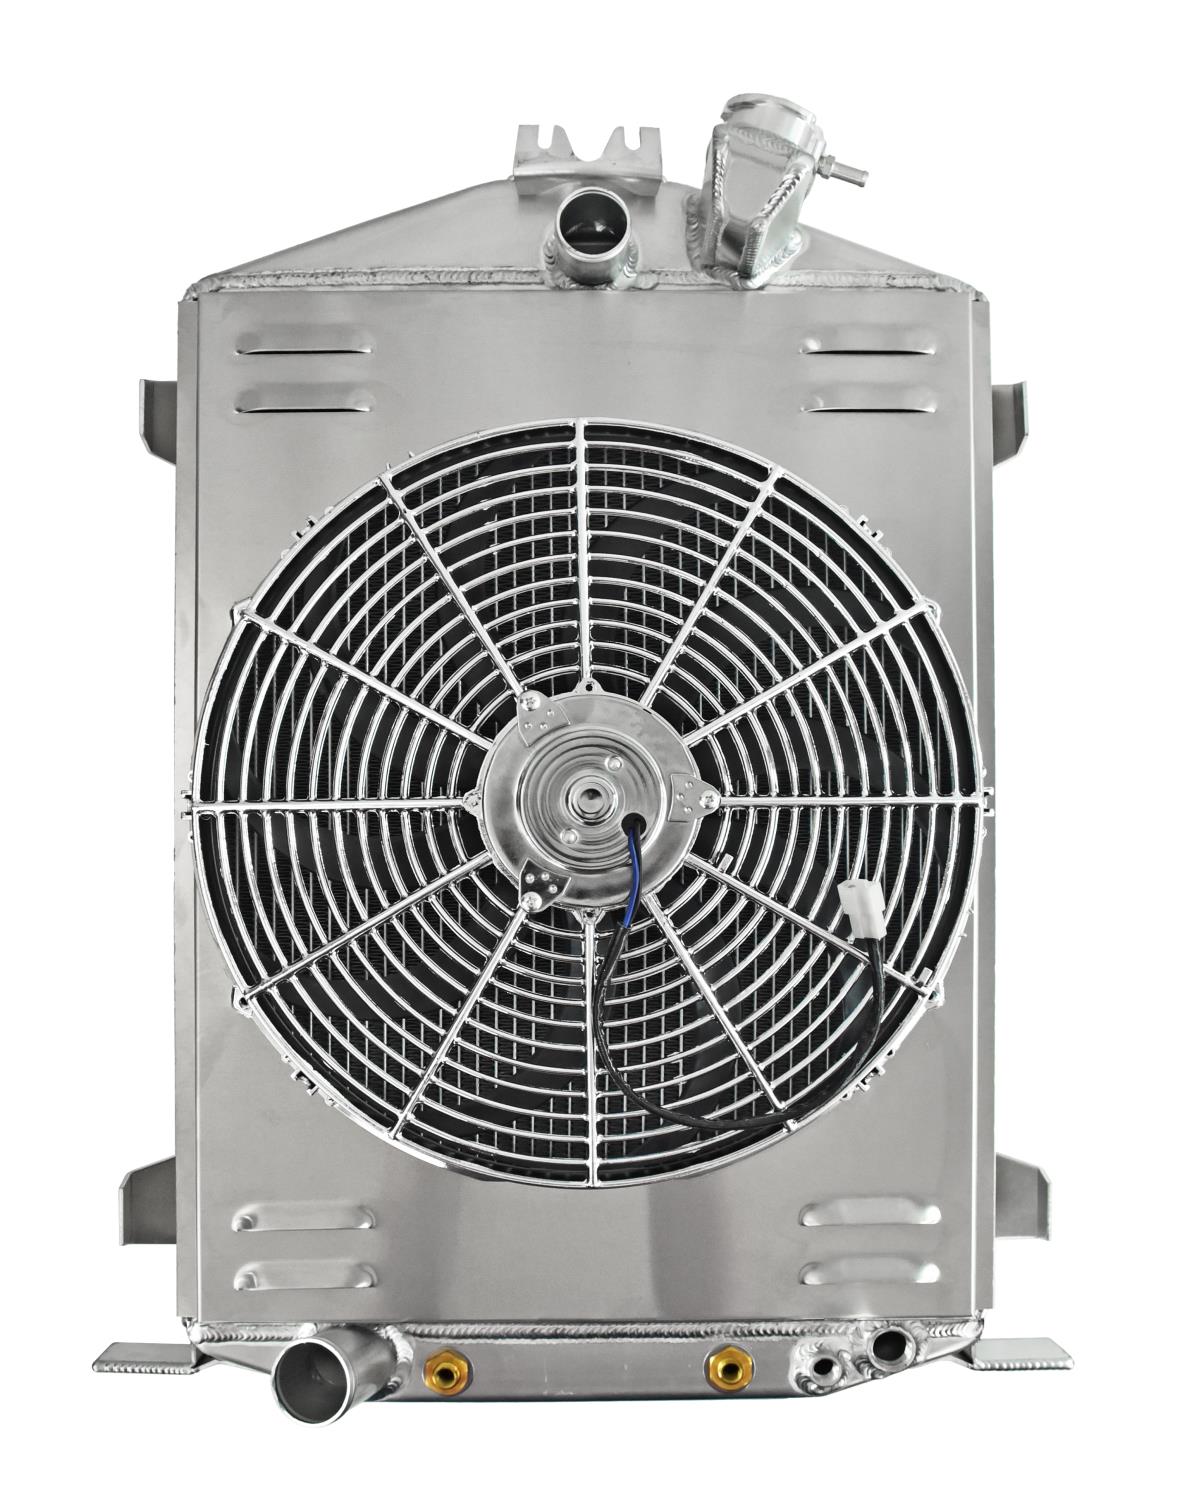 Aluminum Radiator & Fan Combo for 1932 Ford HI-BOY with Ford V8 Engine and Full-Height Grill [16 in. Fan]